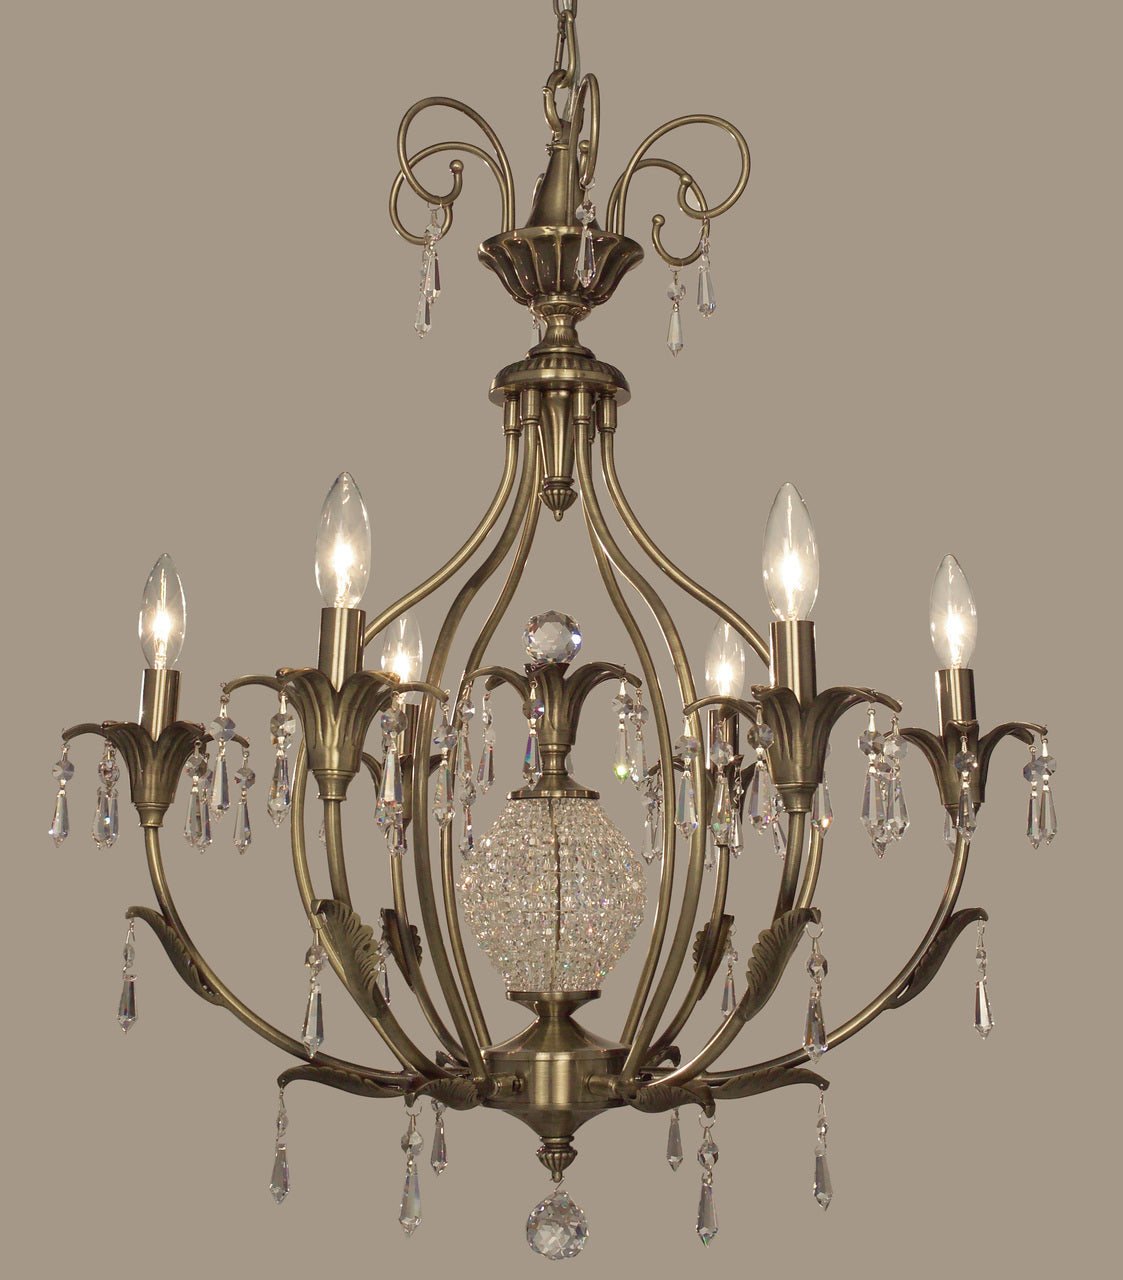 Classic Lighting 16116 ABR S Sharon Crystal Chandelier in Antique Brass